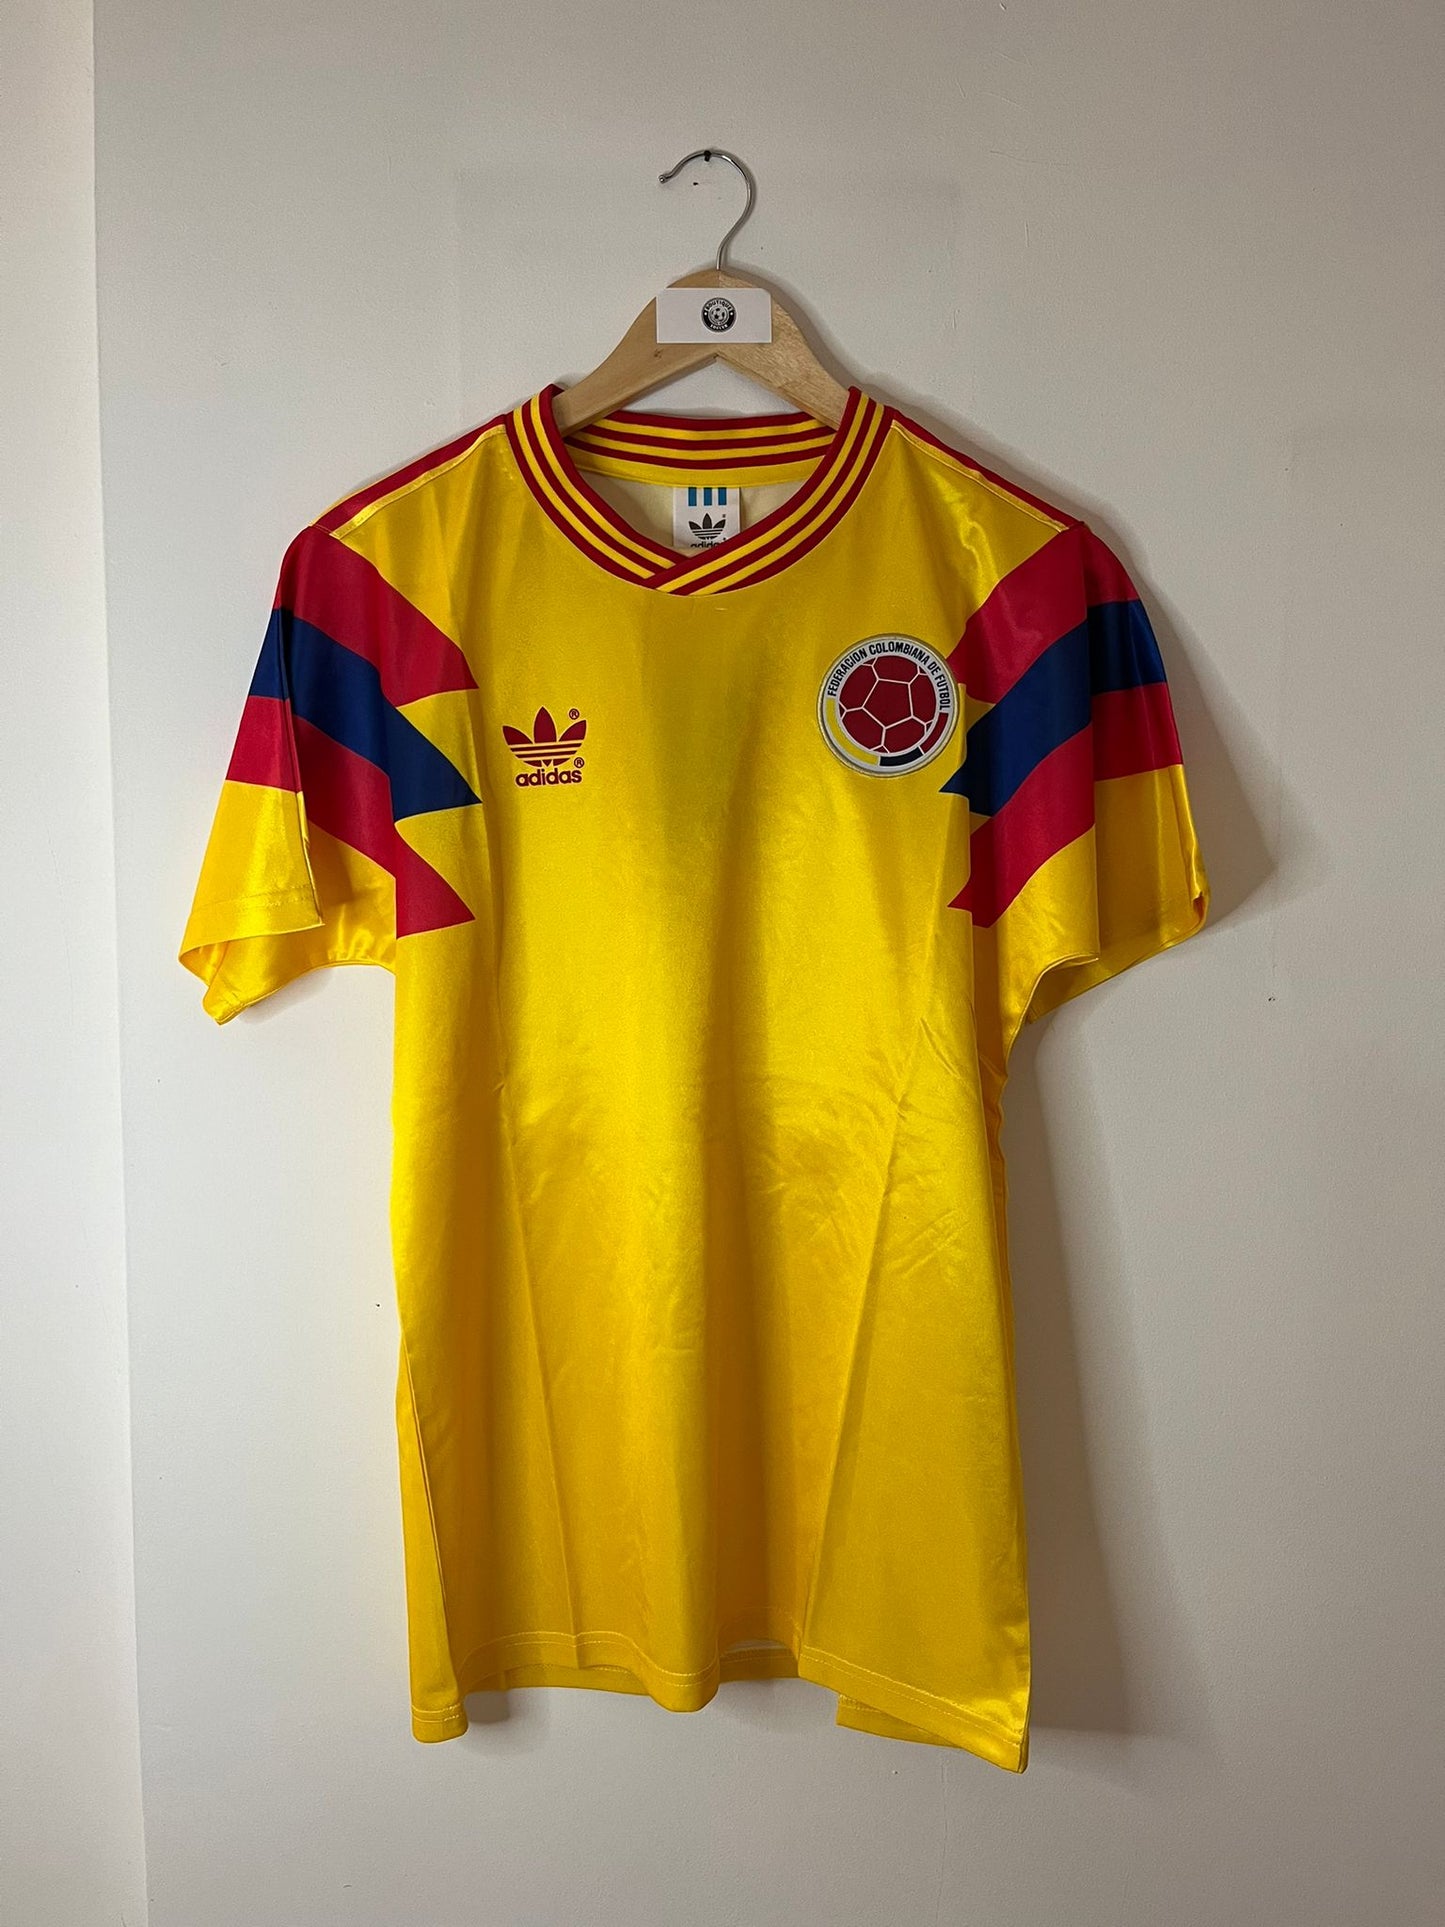 Colombia 1990 (Home) [S] - #10